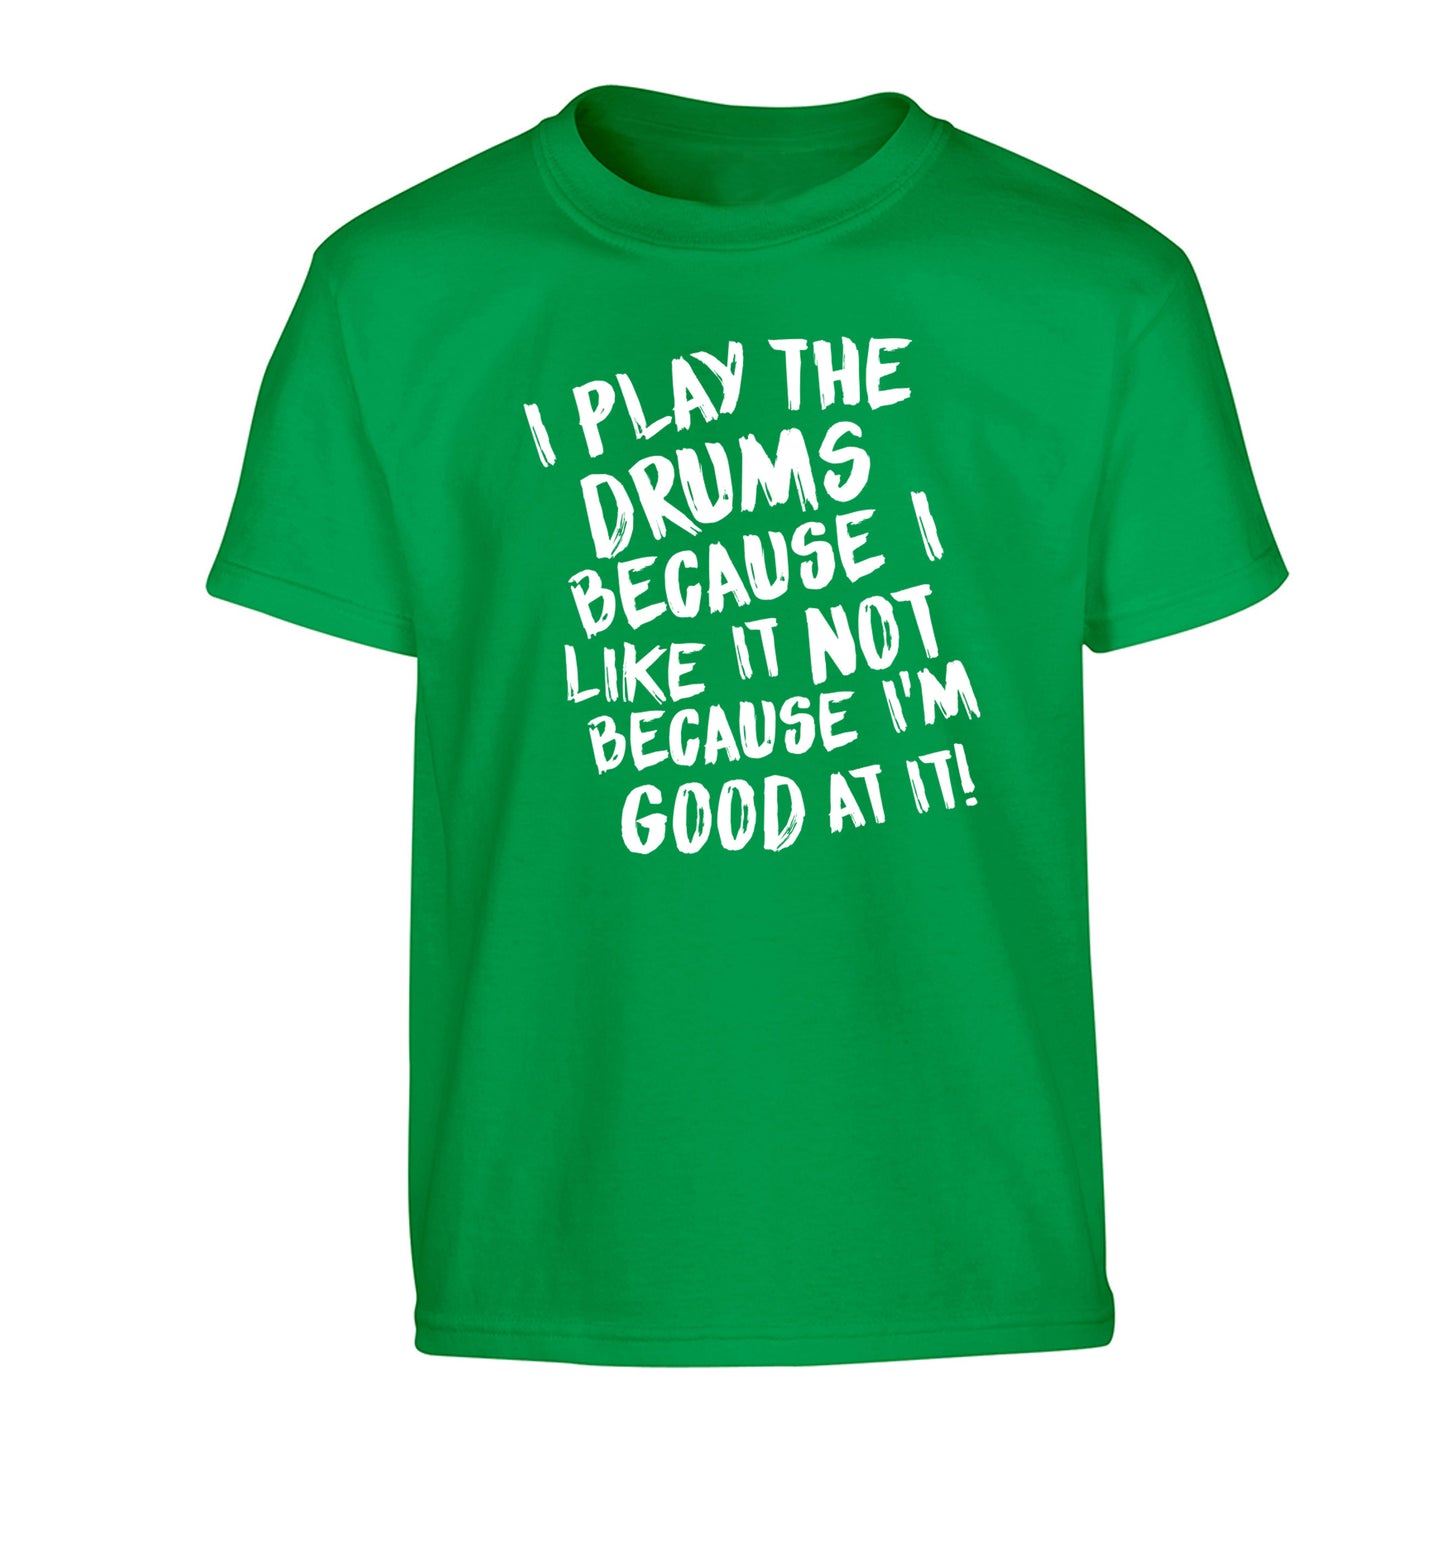 I play the drums because I like it not because I'm good at it Children's green Tshirt 12-14 Years